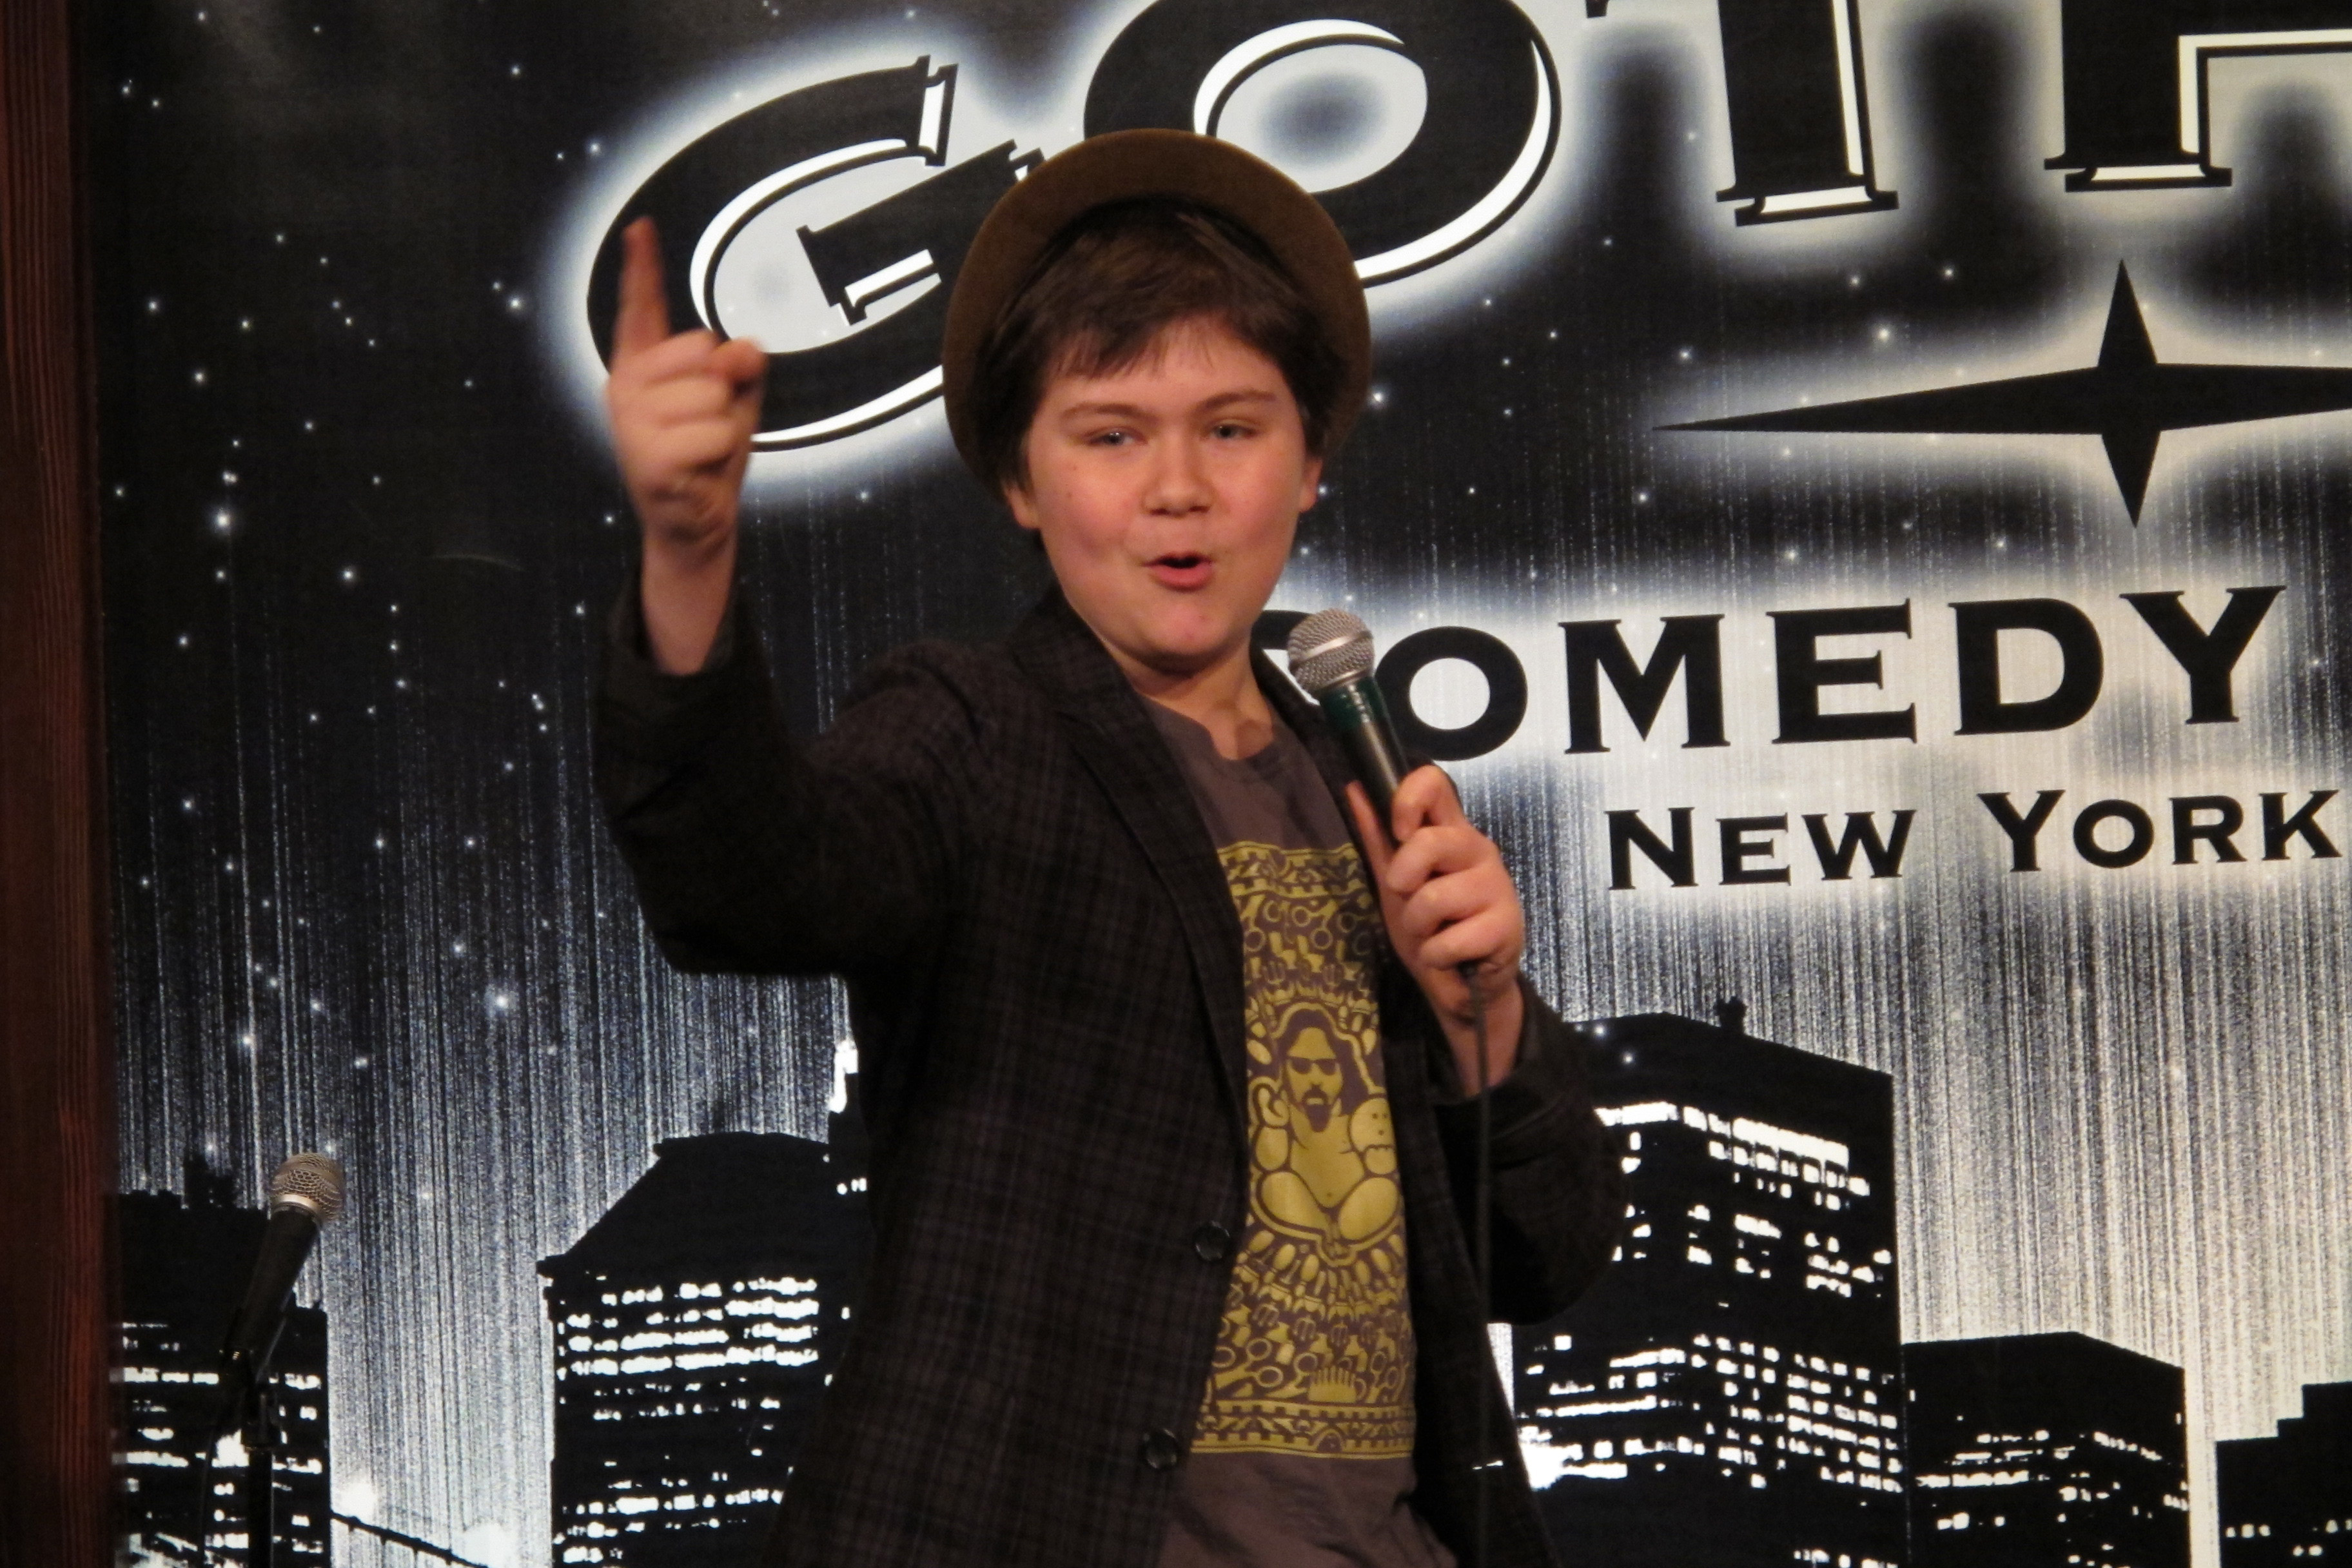 Conor performing at Gotham Comedy Club, NYC